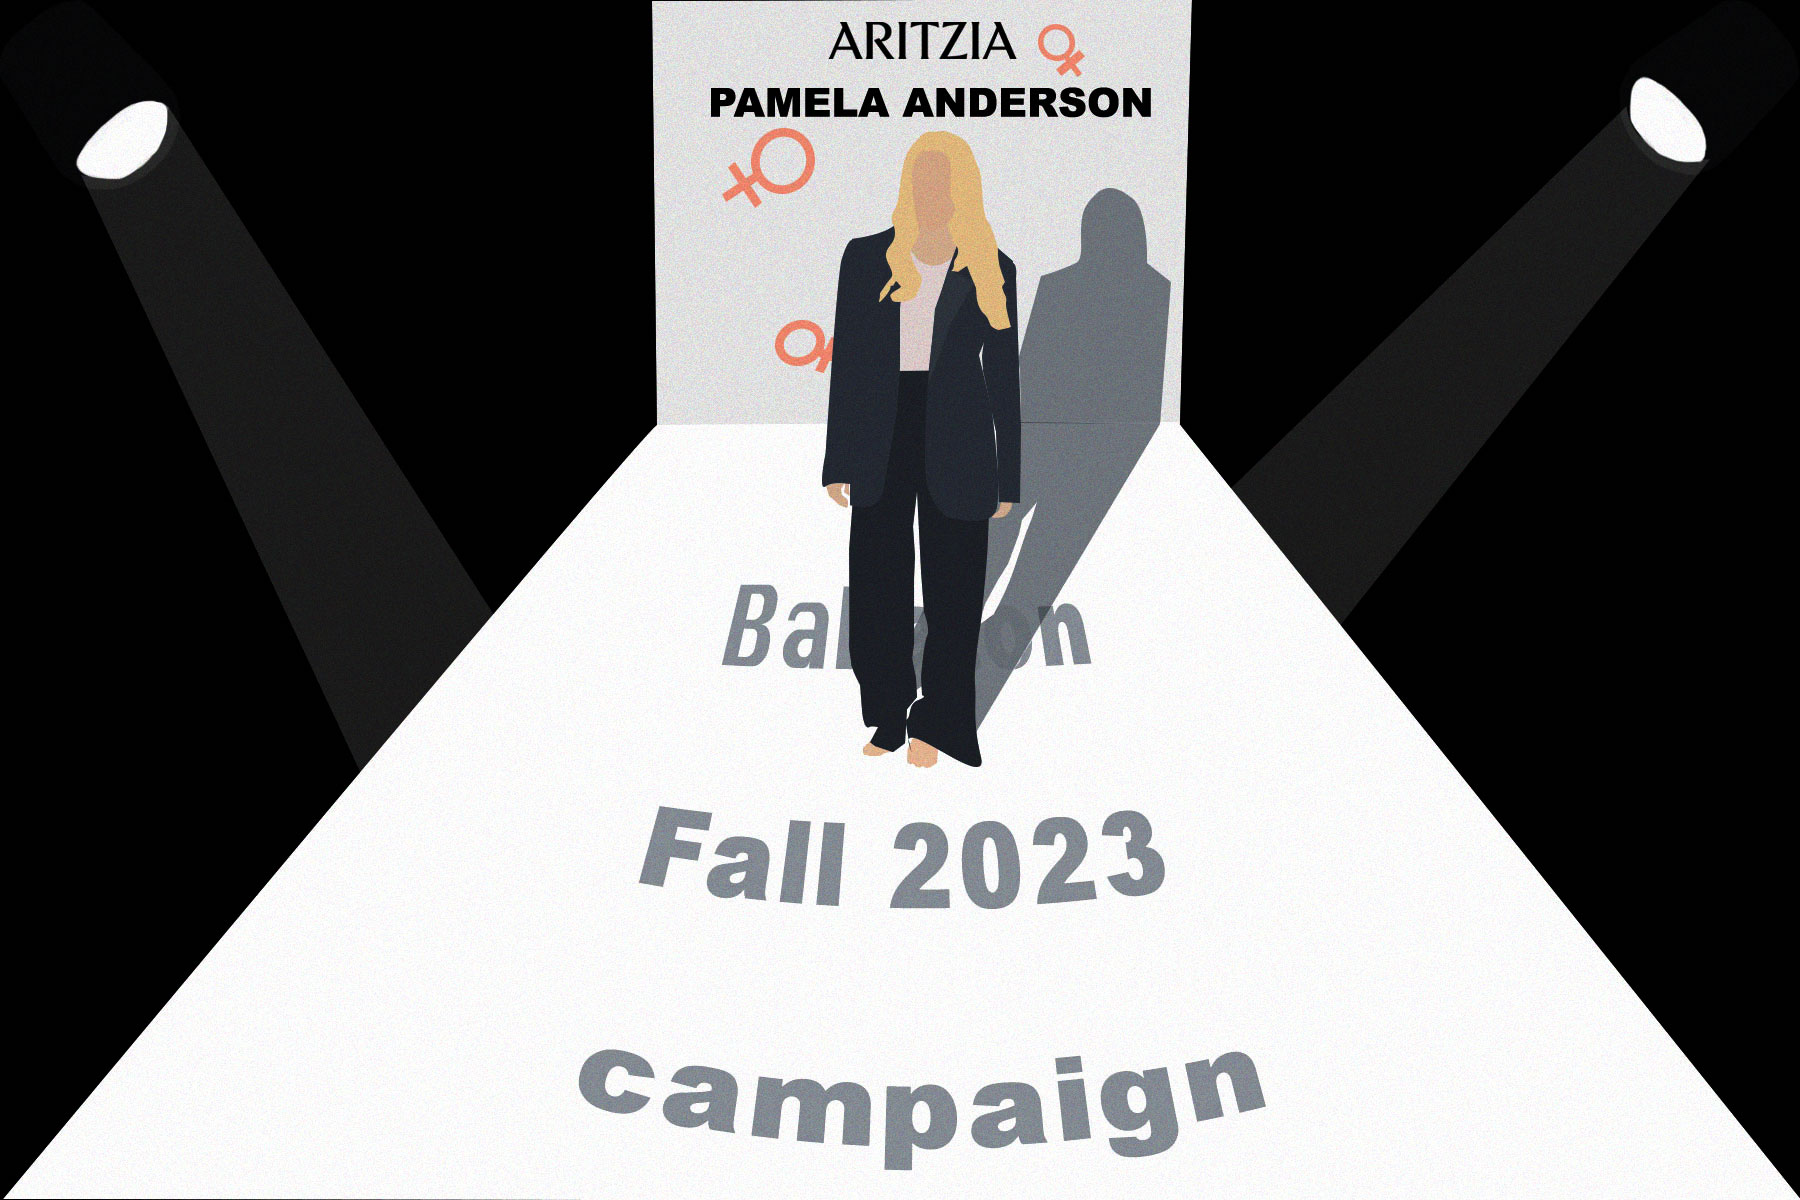 In an article about Pamela Anderson, the actress wears a black suit and stands on a white carpet that reads "Baywatch Fall 2023 Campaign."